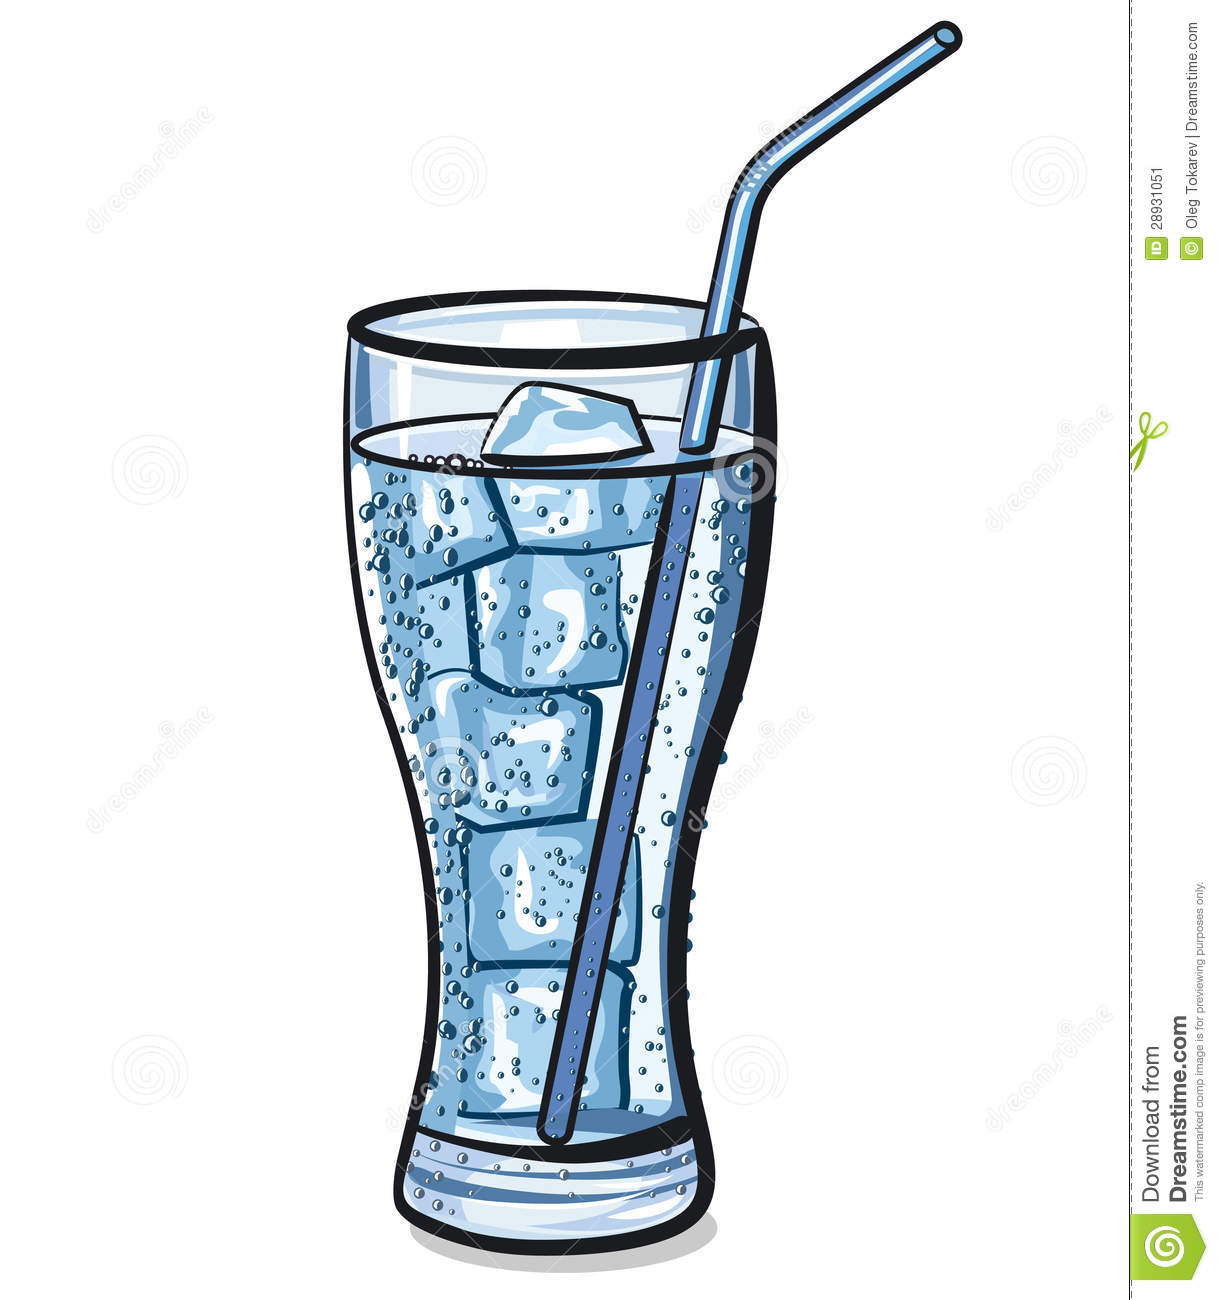 glass of water clipart - Cup Of Water Clipart